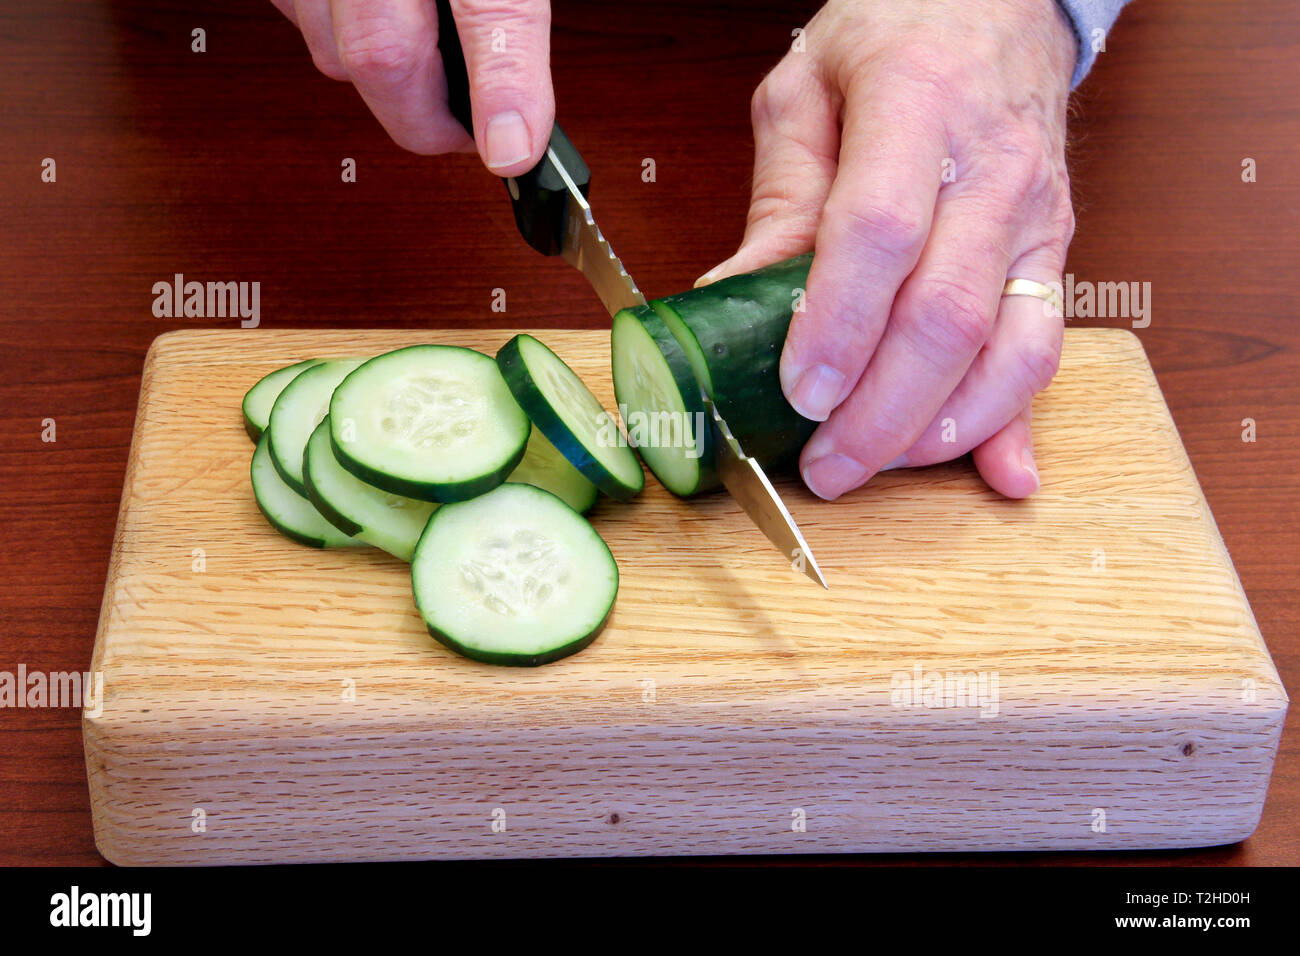 Chef slicing a Cucumber on a wooden cutting board Stock Photo